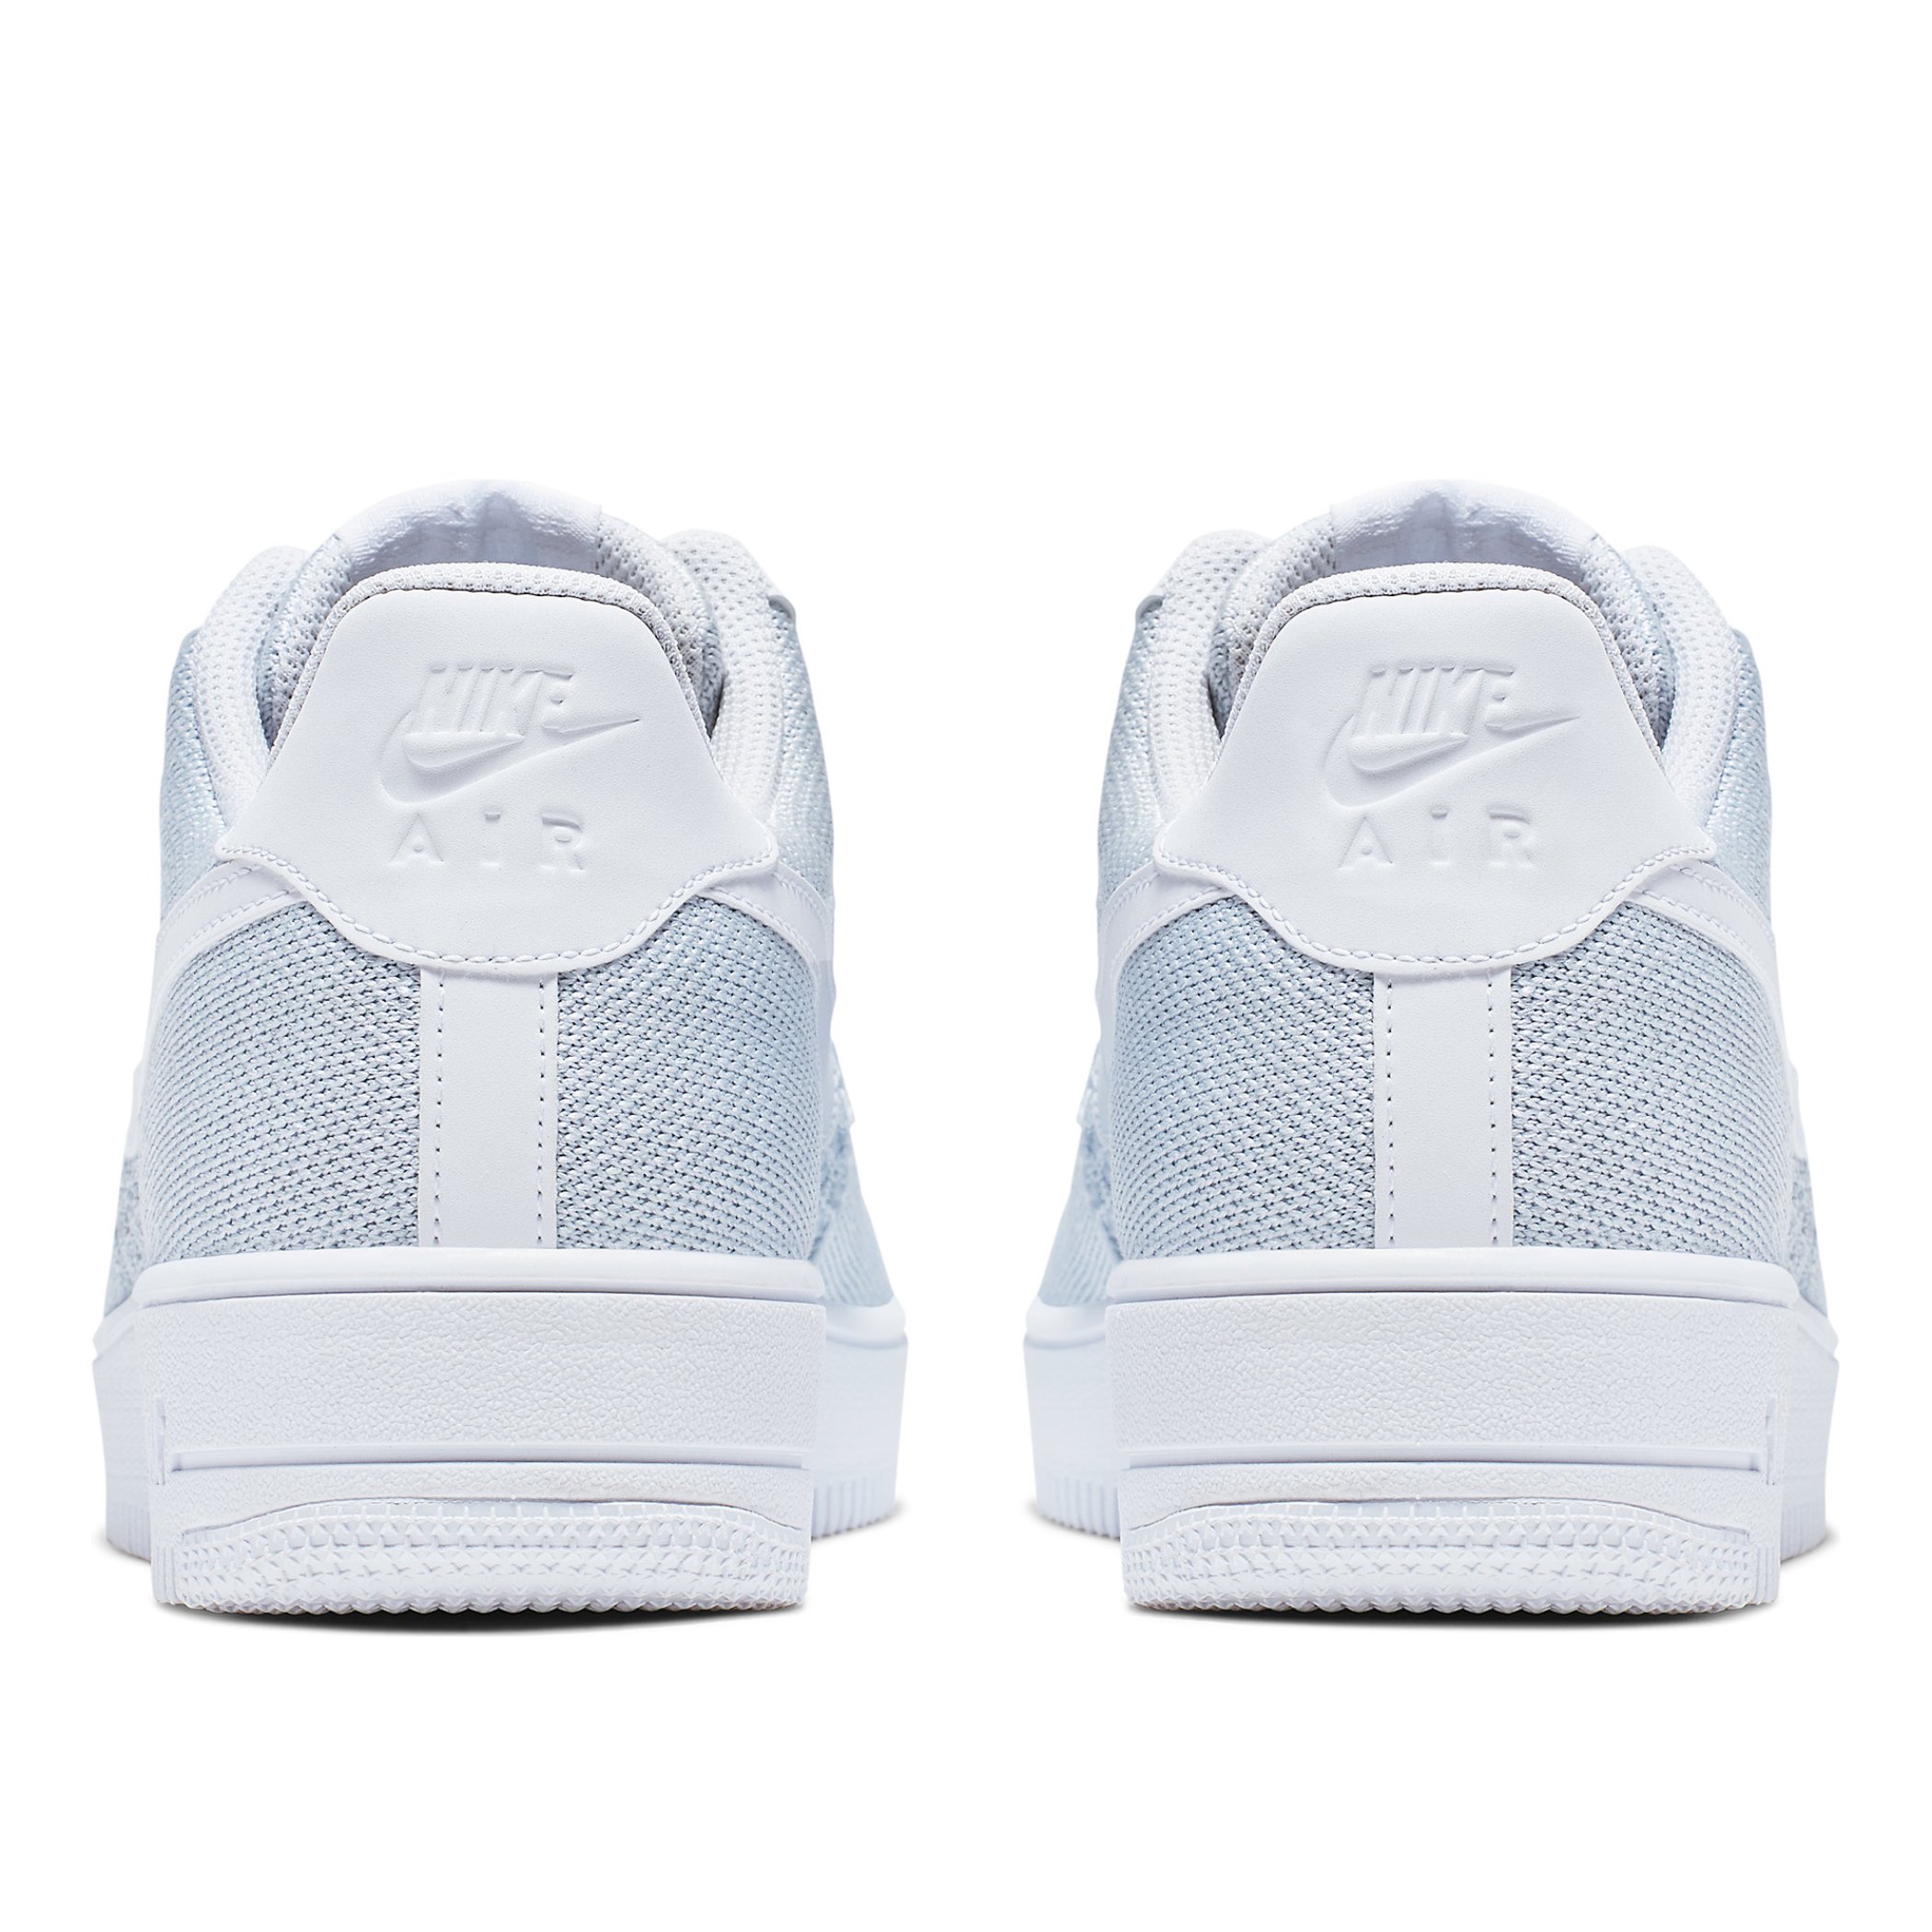 nike air force 1 flyknit 2 white